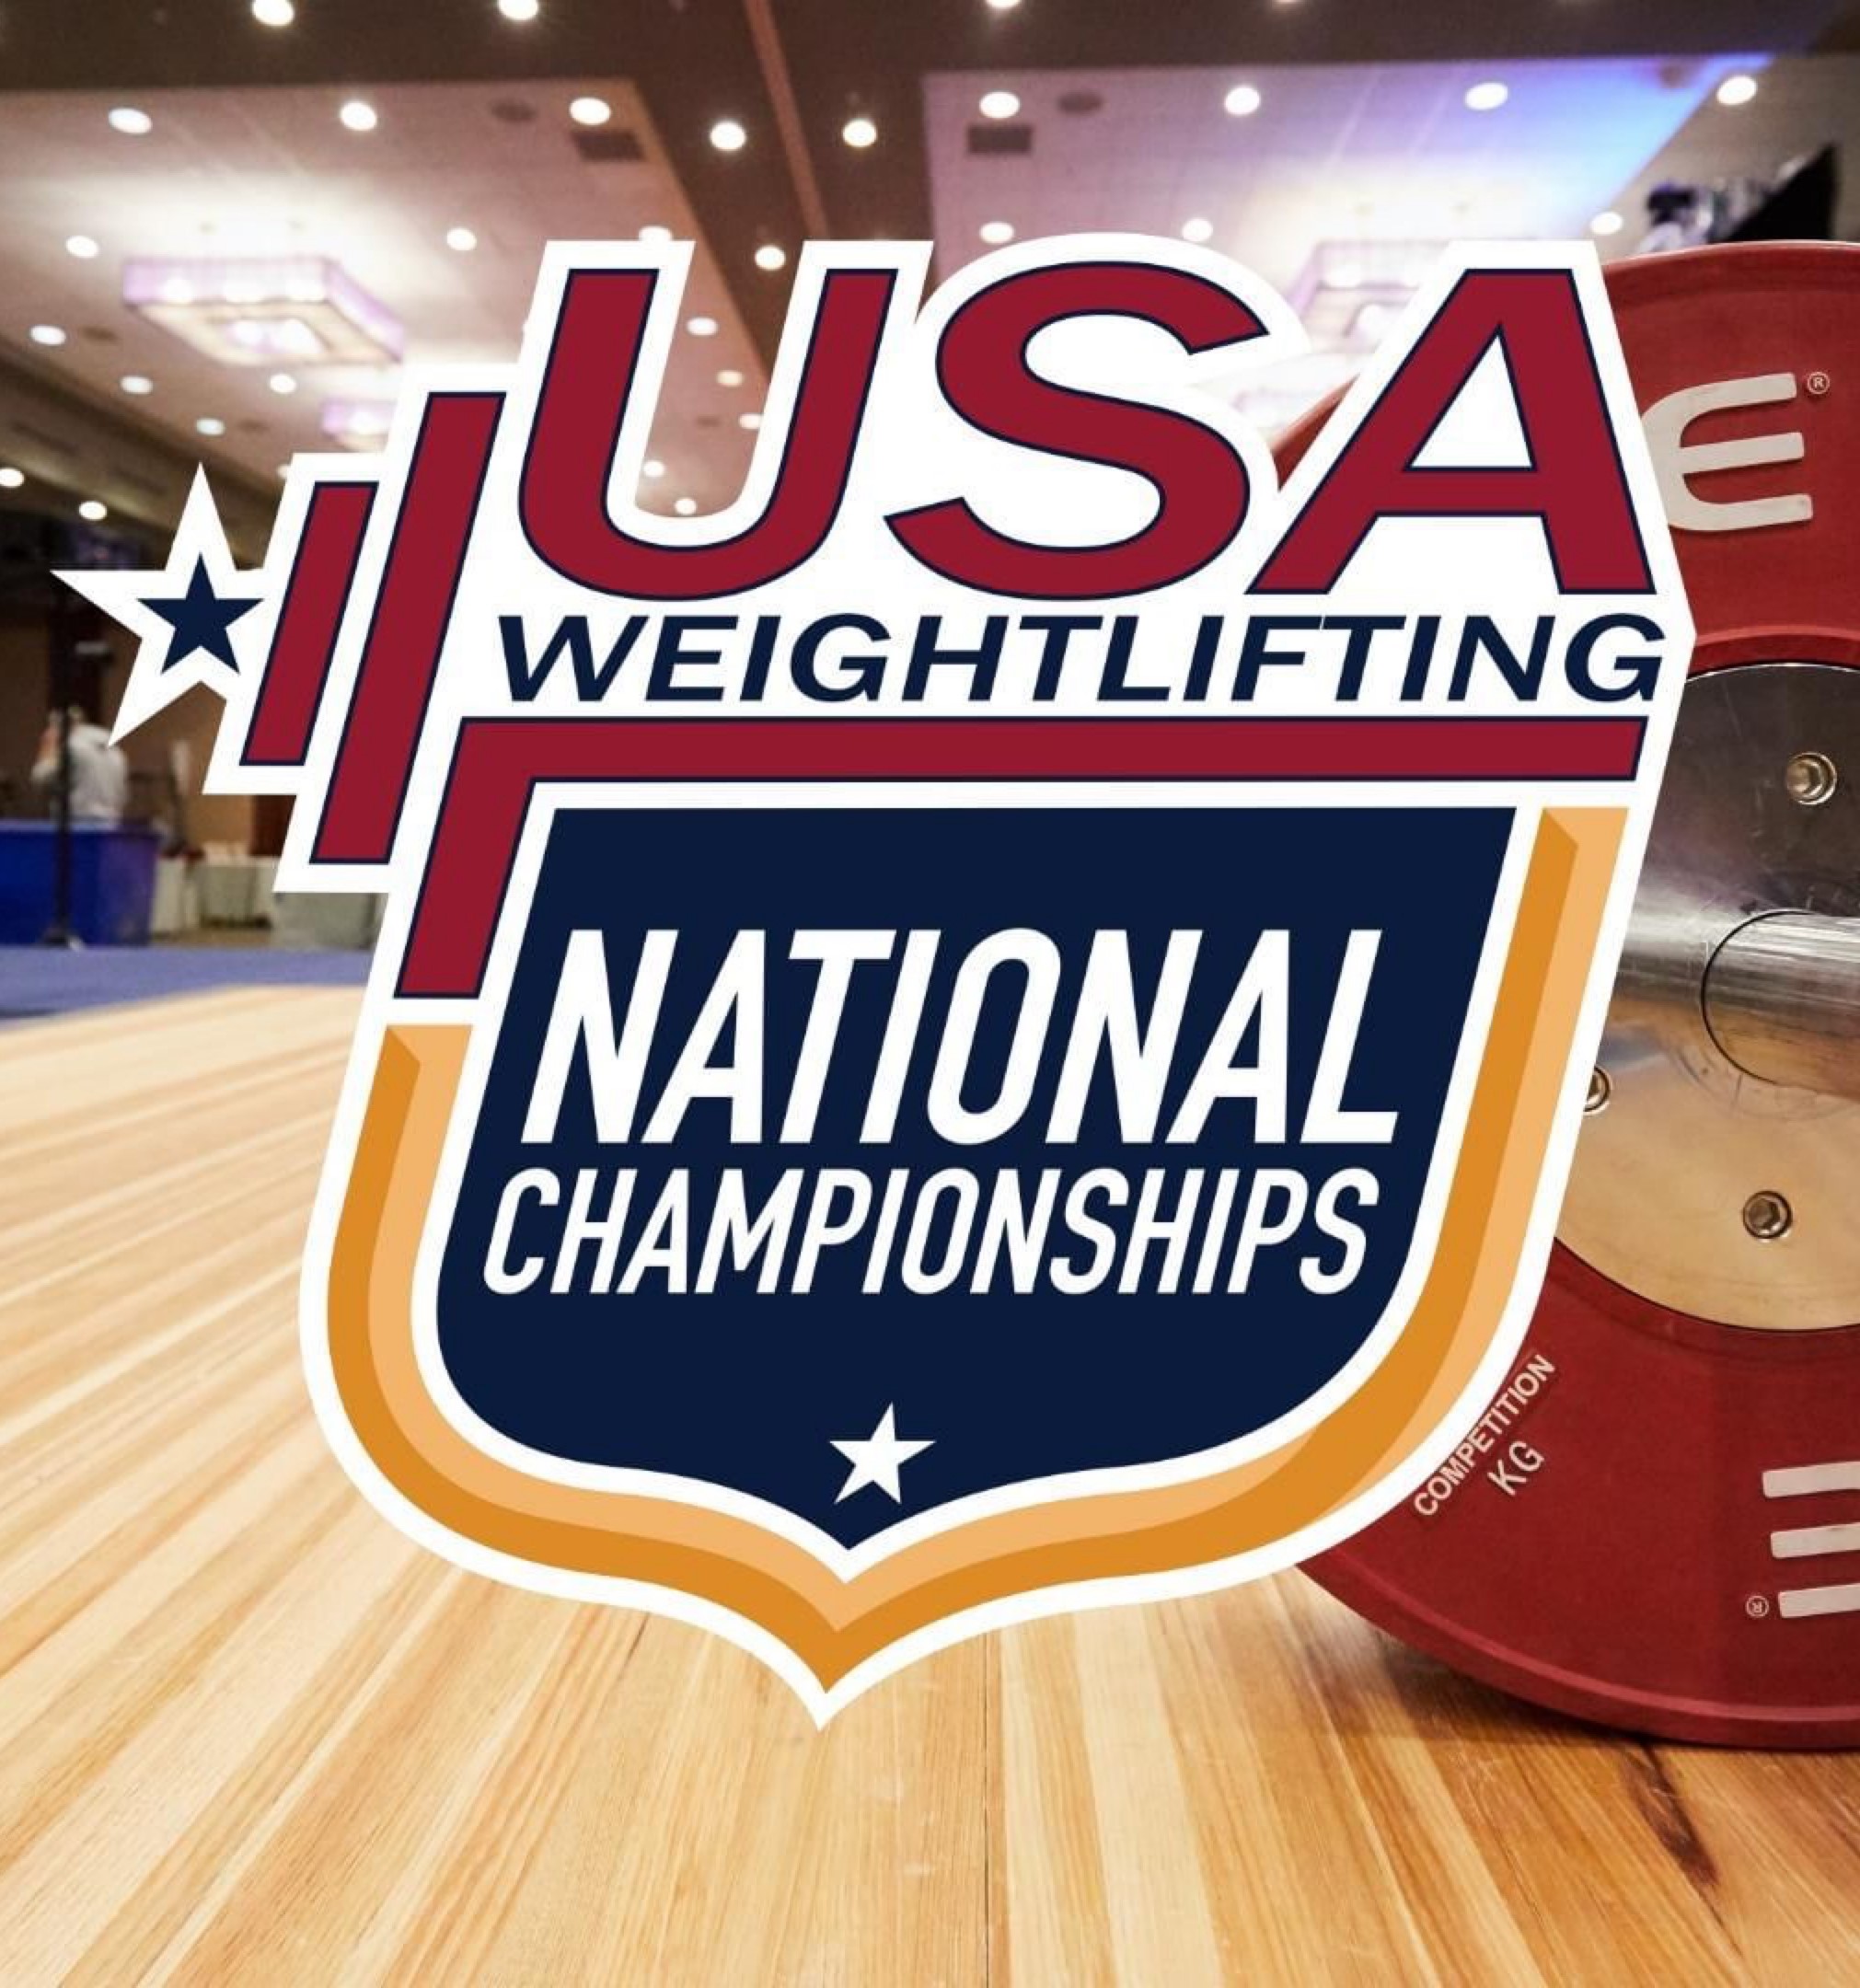 USAW National Championship participation